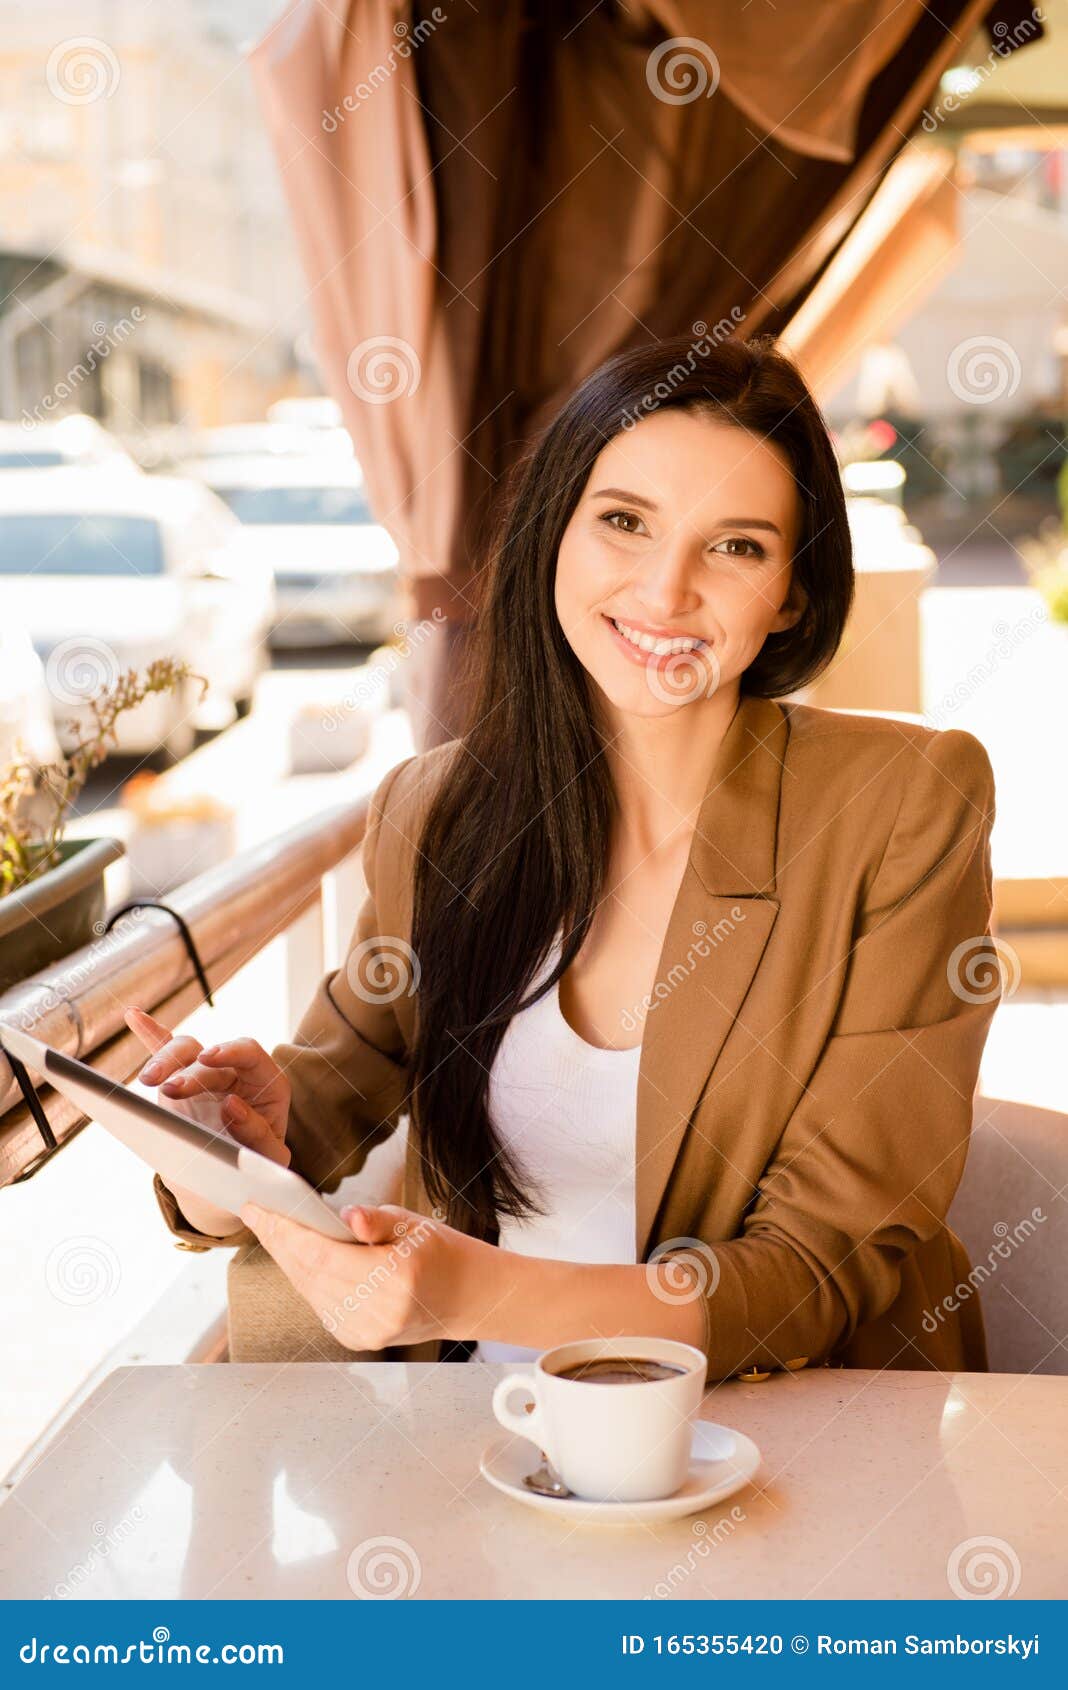 young woman with digitale tablet and cup of coffee in cafe